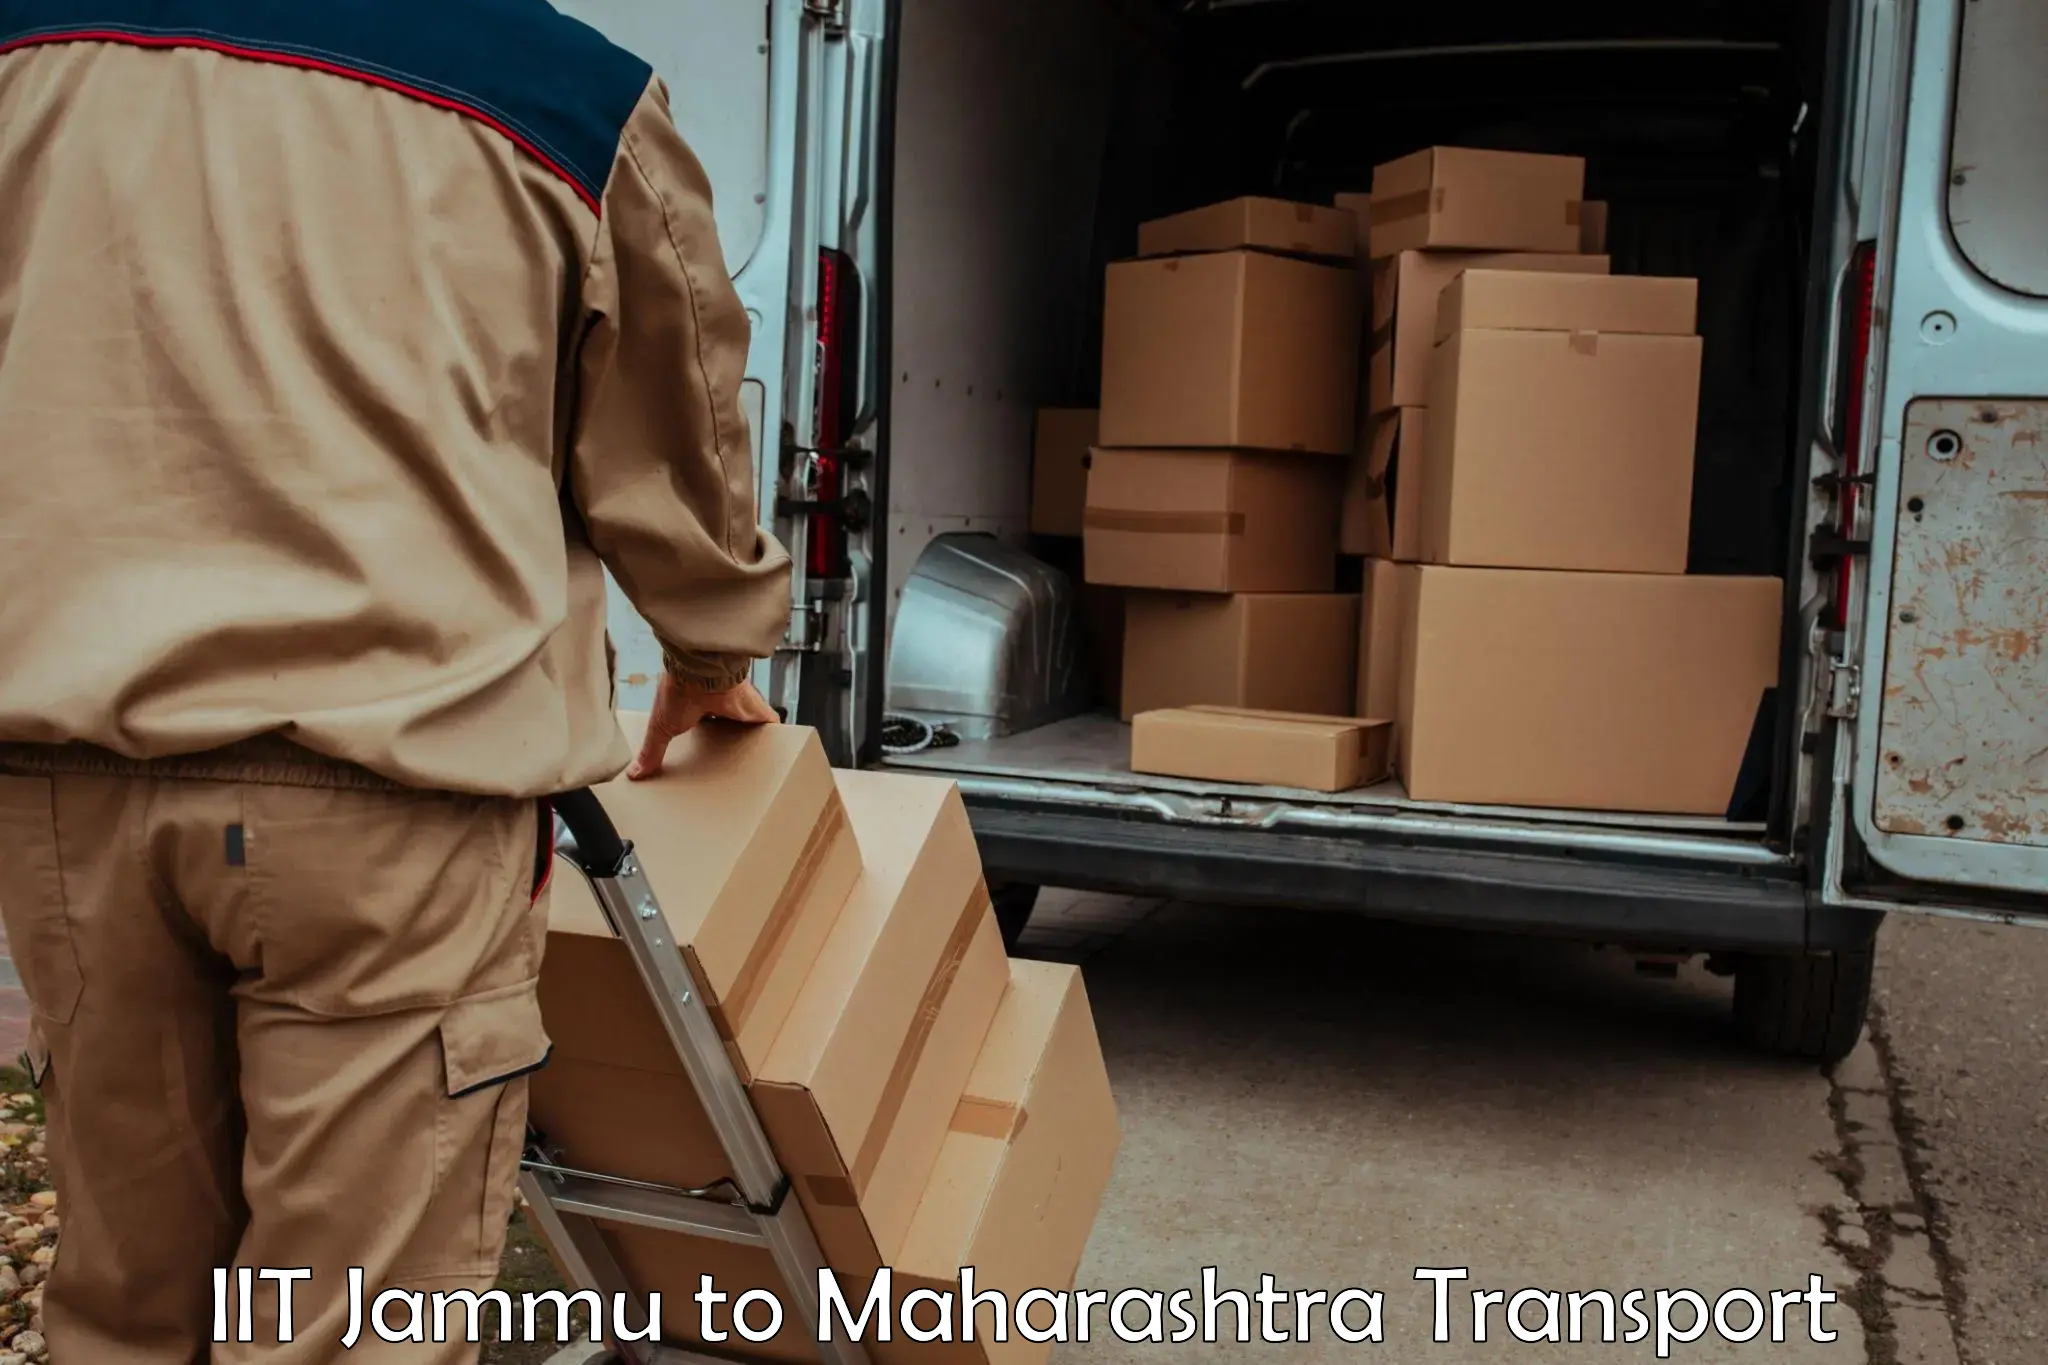 Delivery service IIT Jammu to Alephata